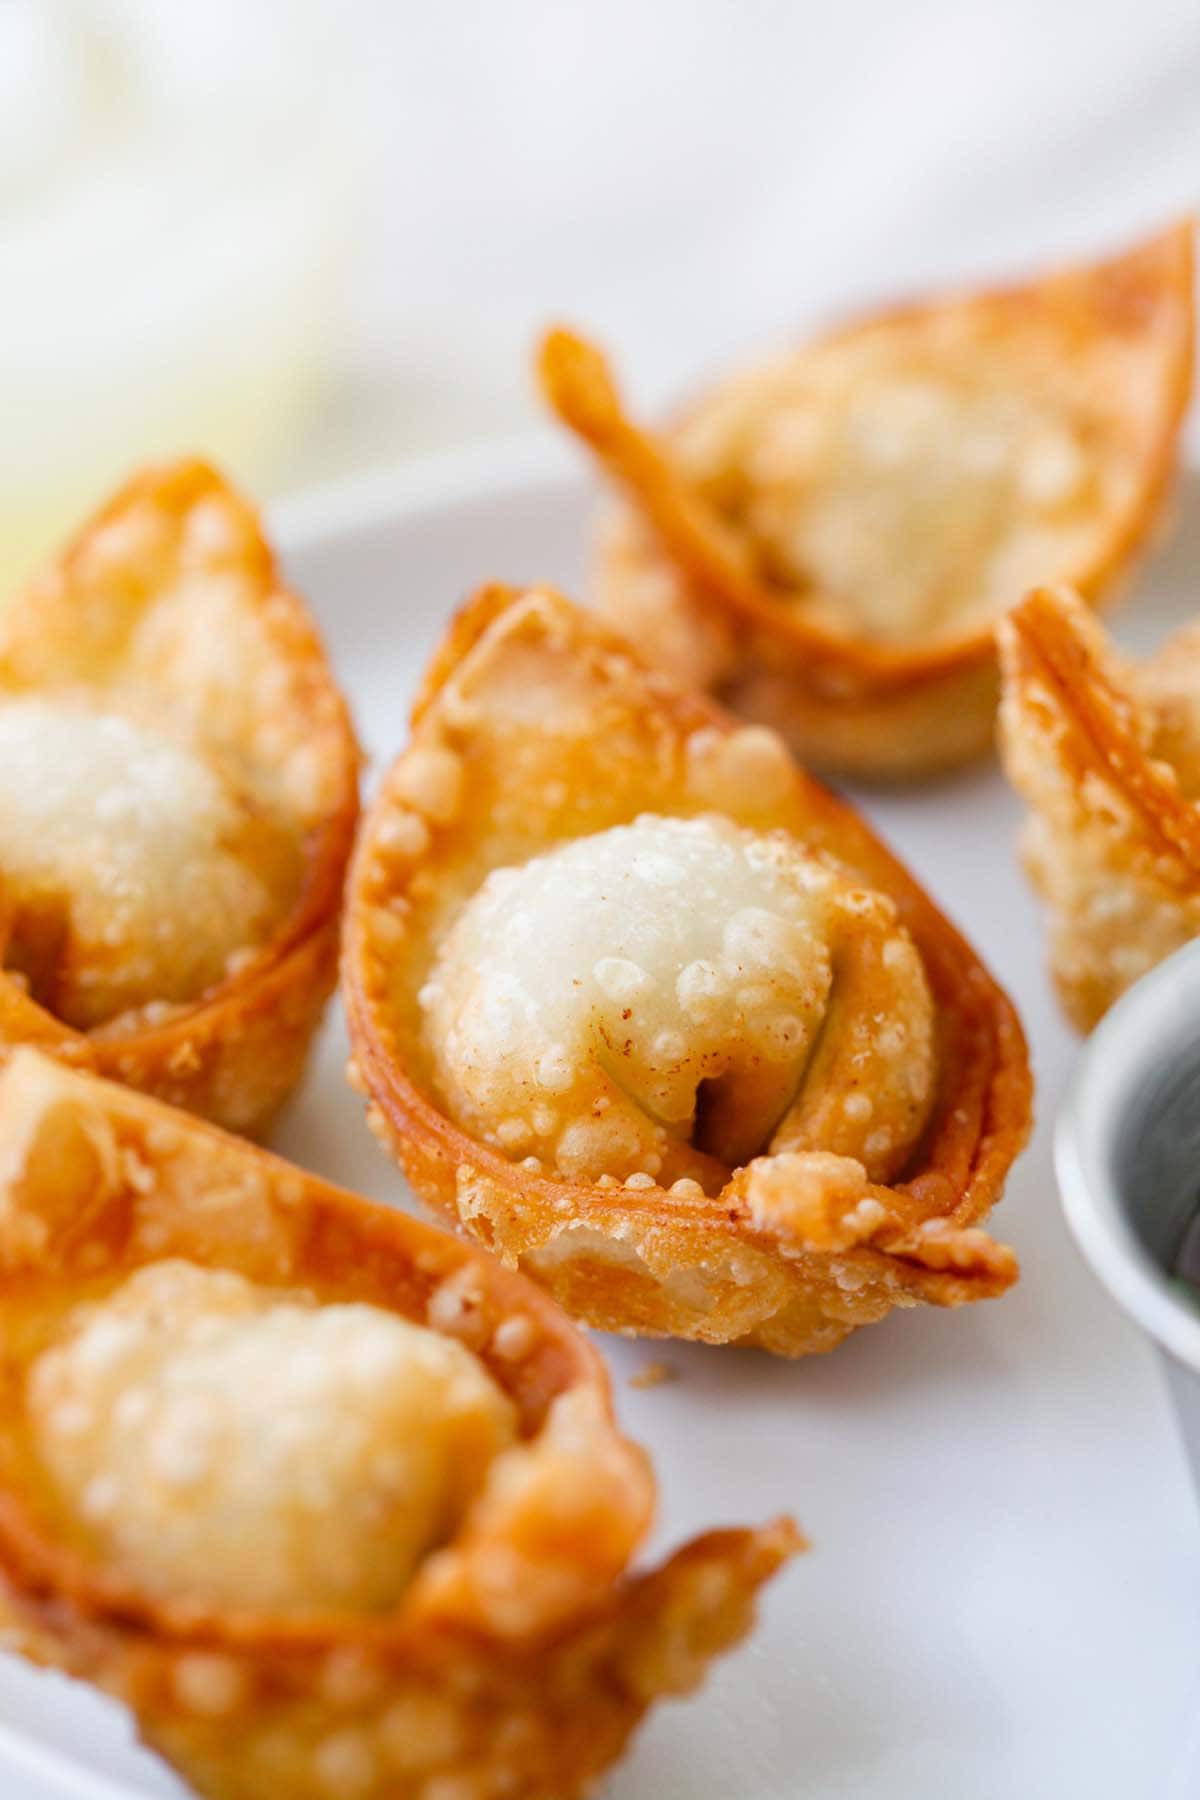 A plate of fried wontons ready to serve with sweet and sour sauce.